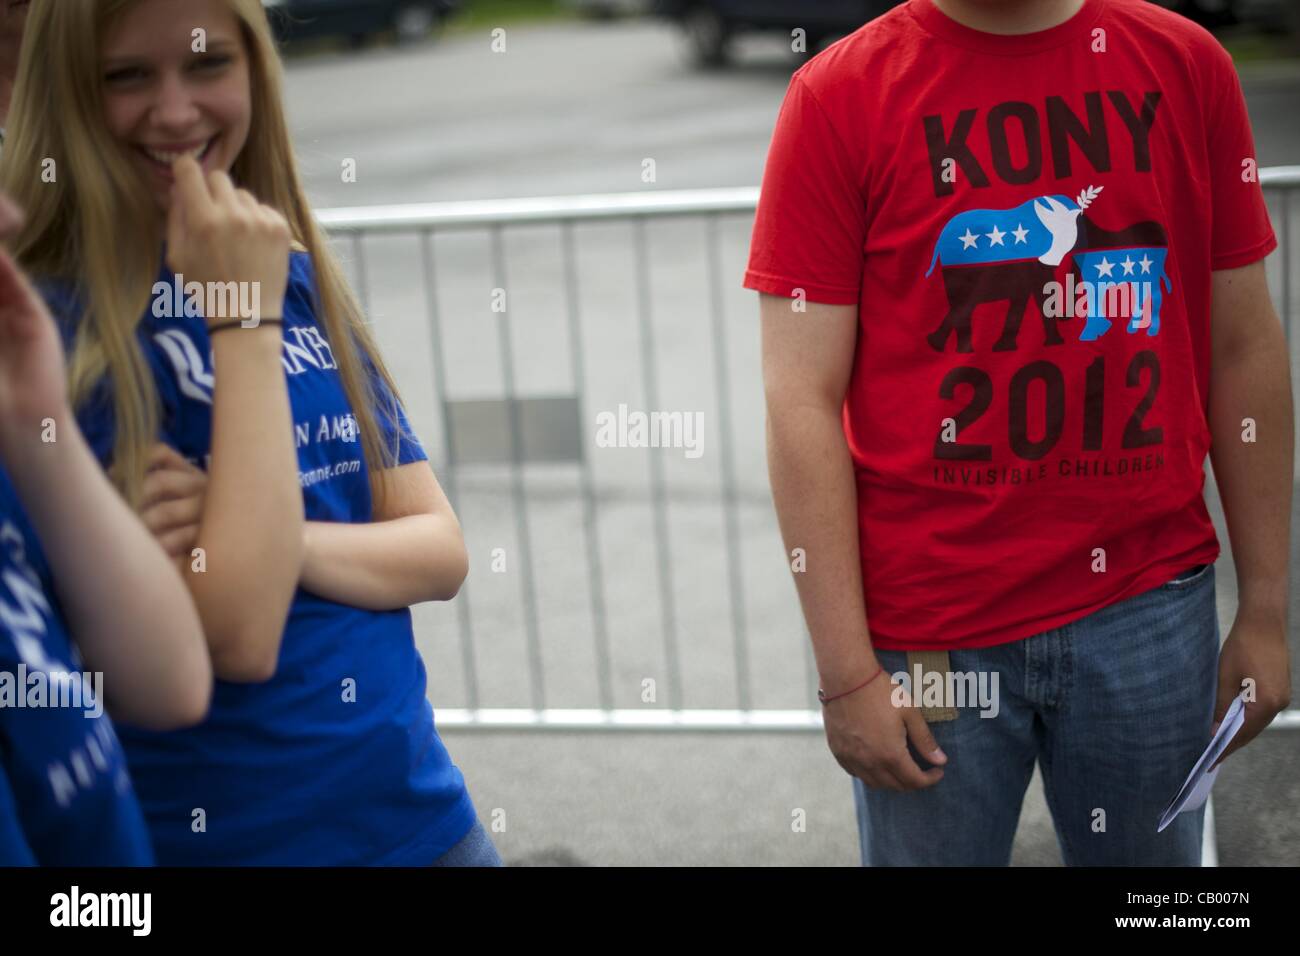 May 2, 2012 - Chantilly, Virginia, U.S - A supporter wears a KONY 2012 t- shirt, lining up for a rally with former Massachusetts Governor Mitt  Romney, a candidate for the Republican presidential